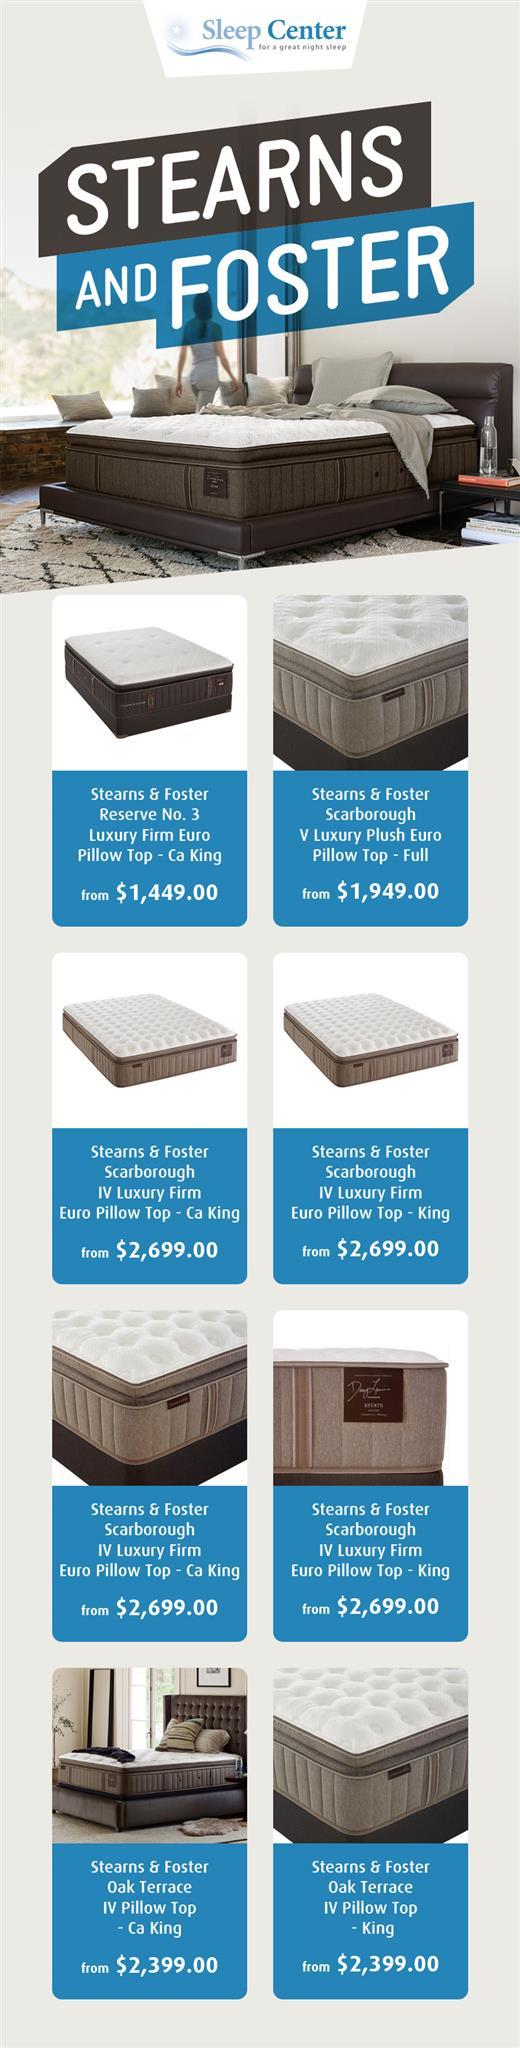 Purchase Stearns and Foster Mattresses Online from Sleep Center